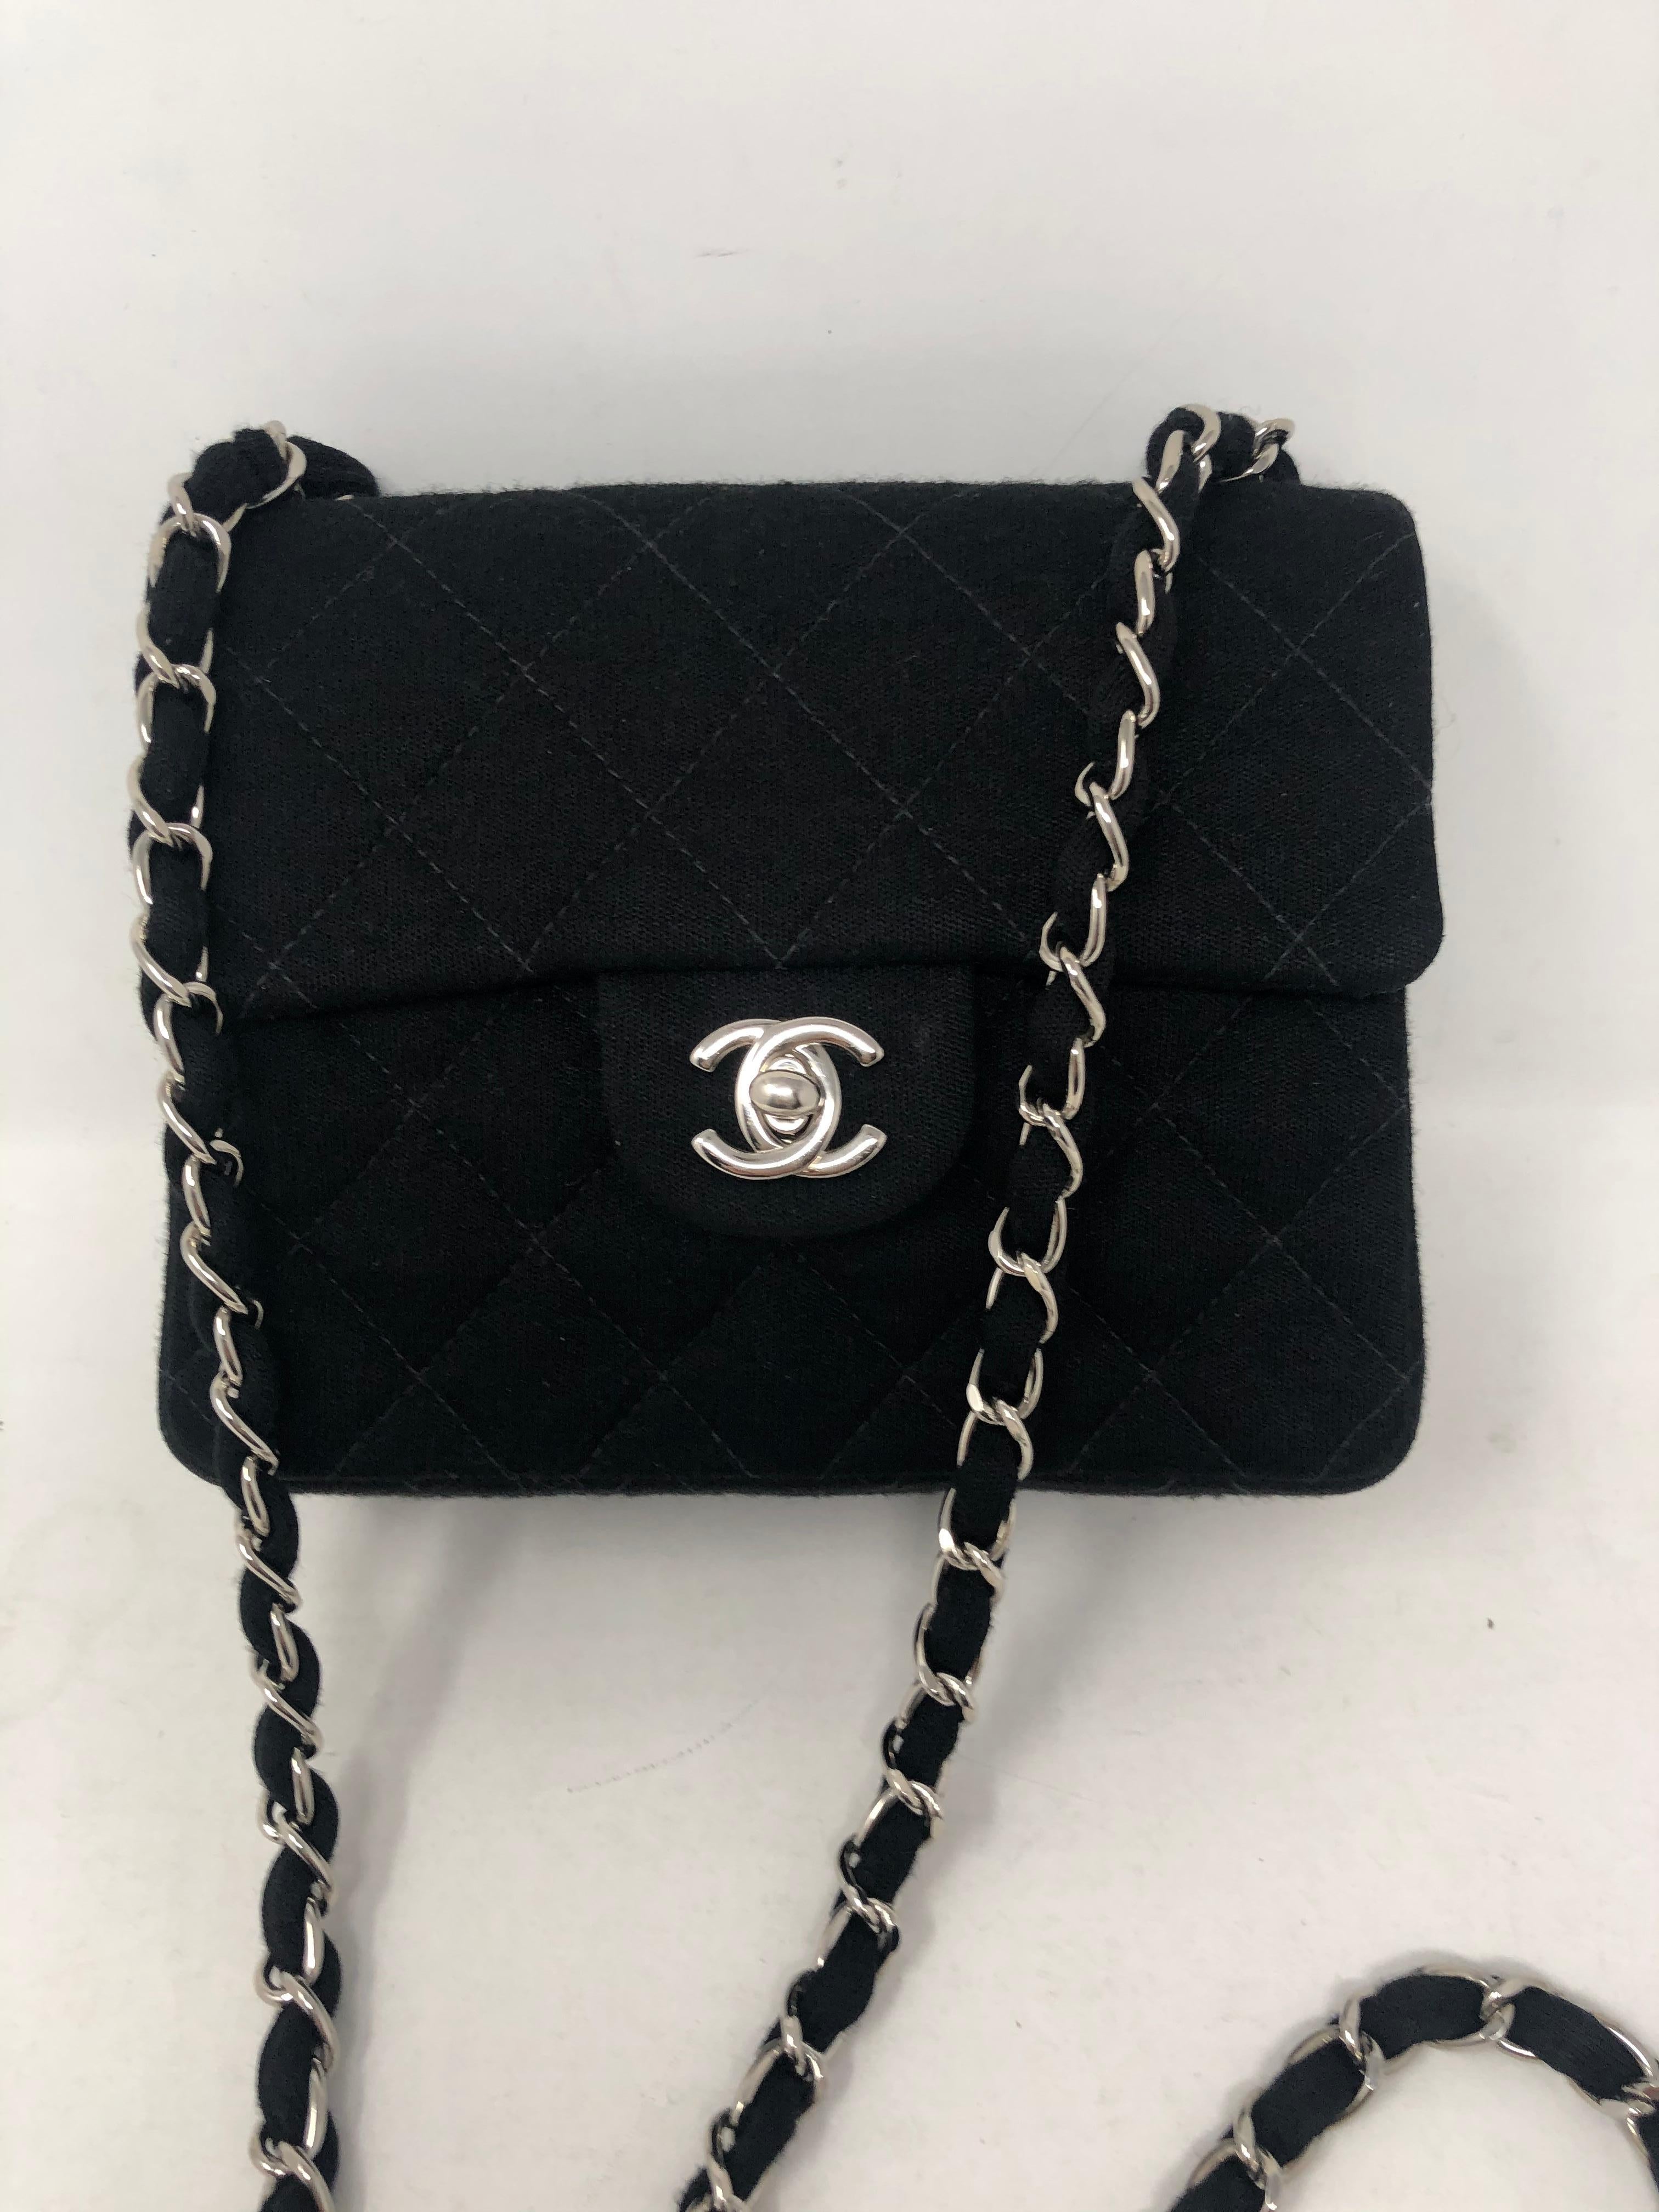 Chanel Black Jersey Cotton Mini Bag. Silver hardware crossbody bag. Not leather but made of fabric. Mint like new condition. Serial number inside bag. Guaranteed authentic. 